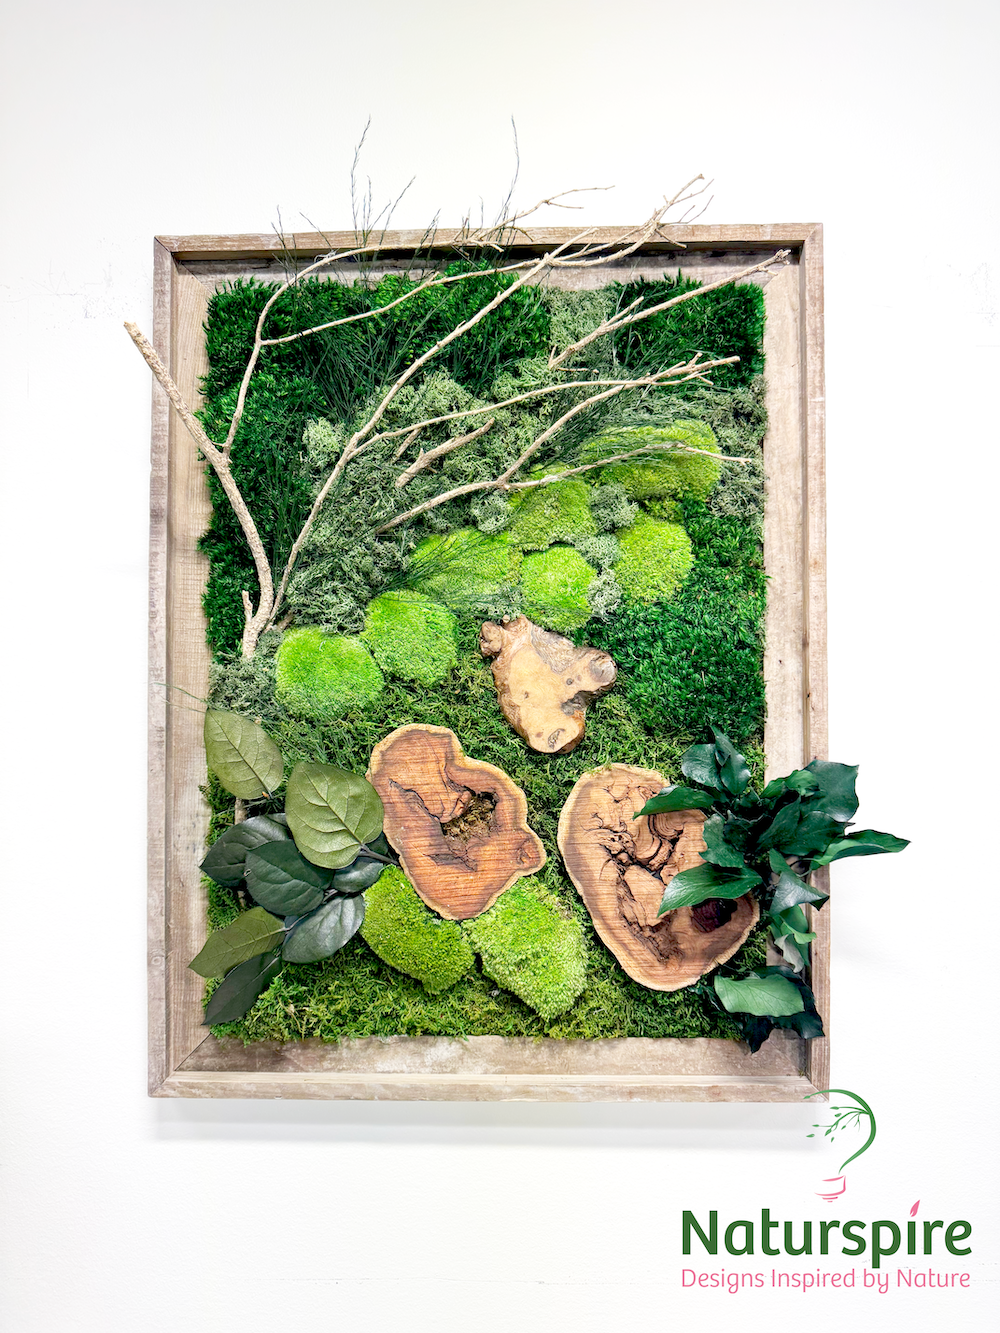 Maintaining Your Preserved Moss Wall Art